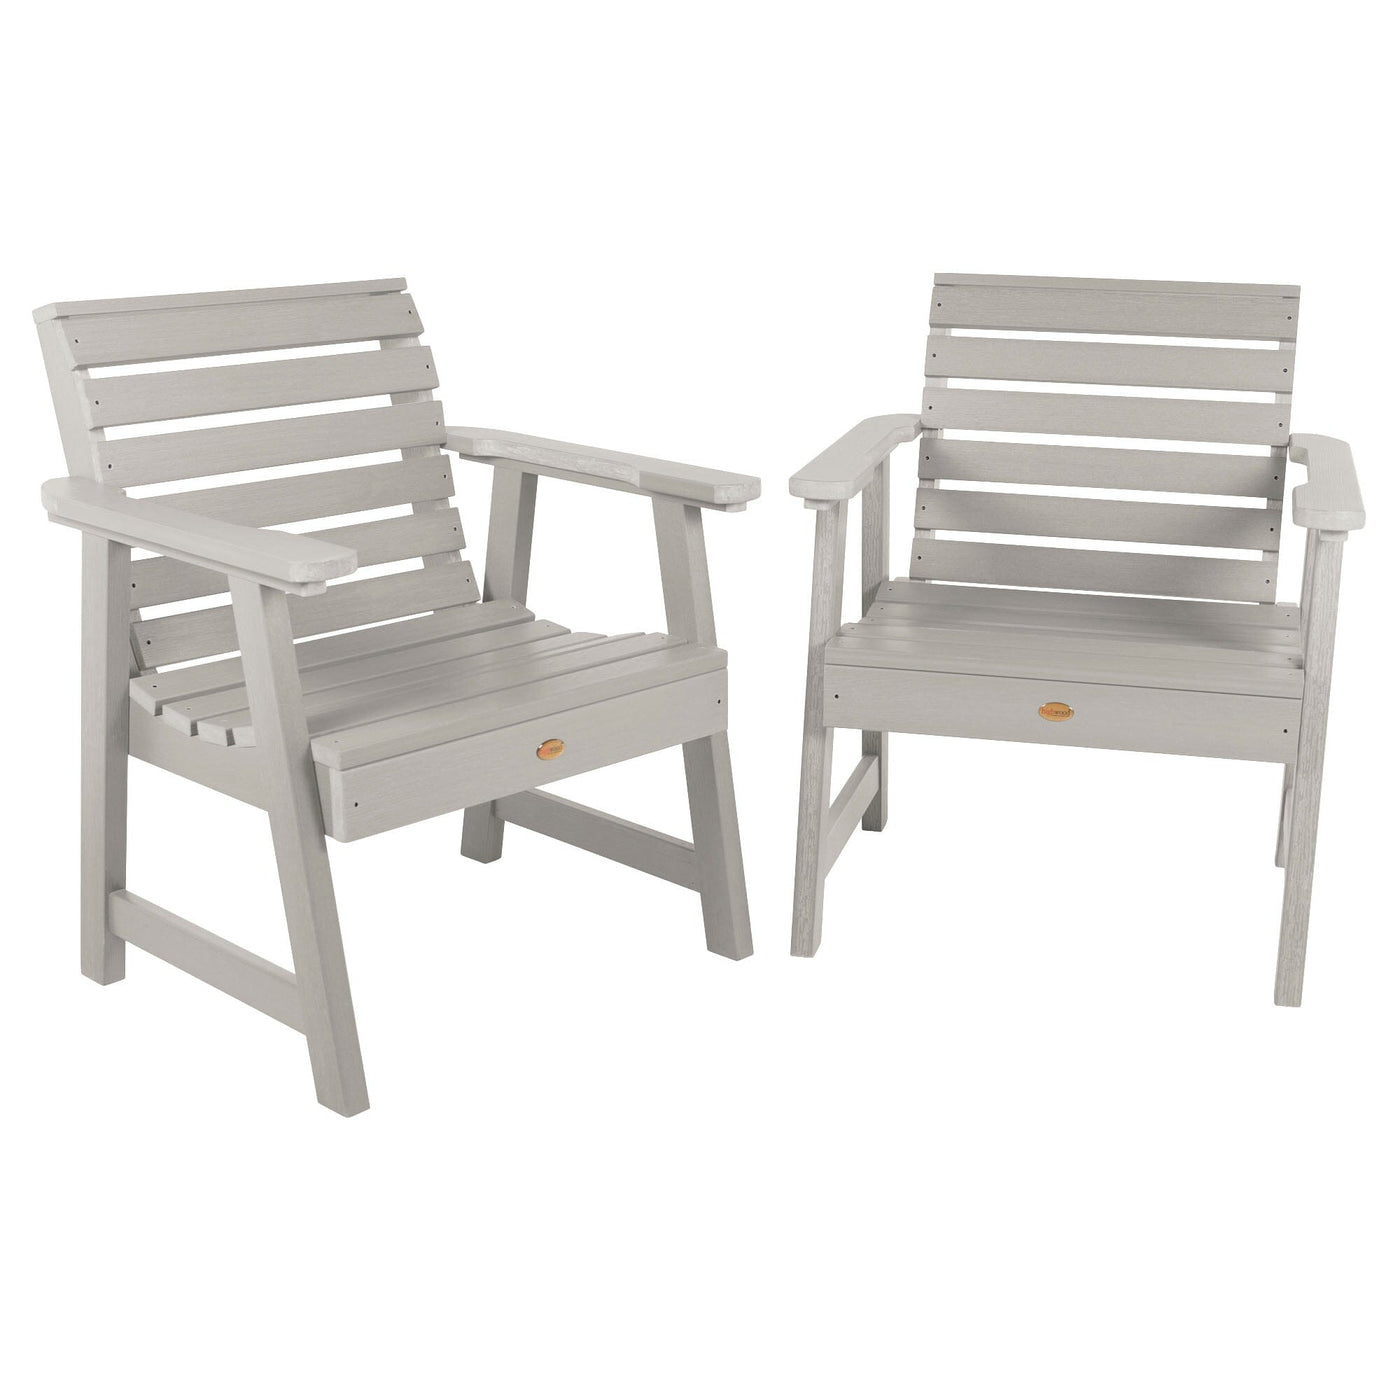 Set of 2 Weatherly Garden Chairs Kitted Sets Highwood USA Harbor Gray 